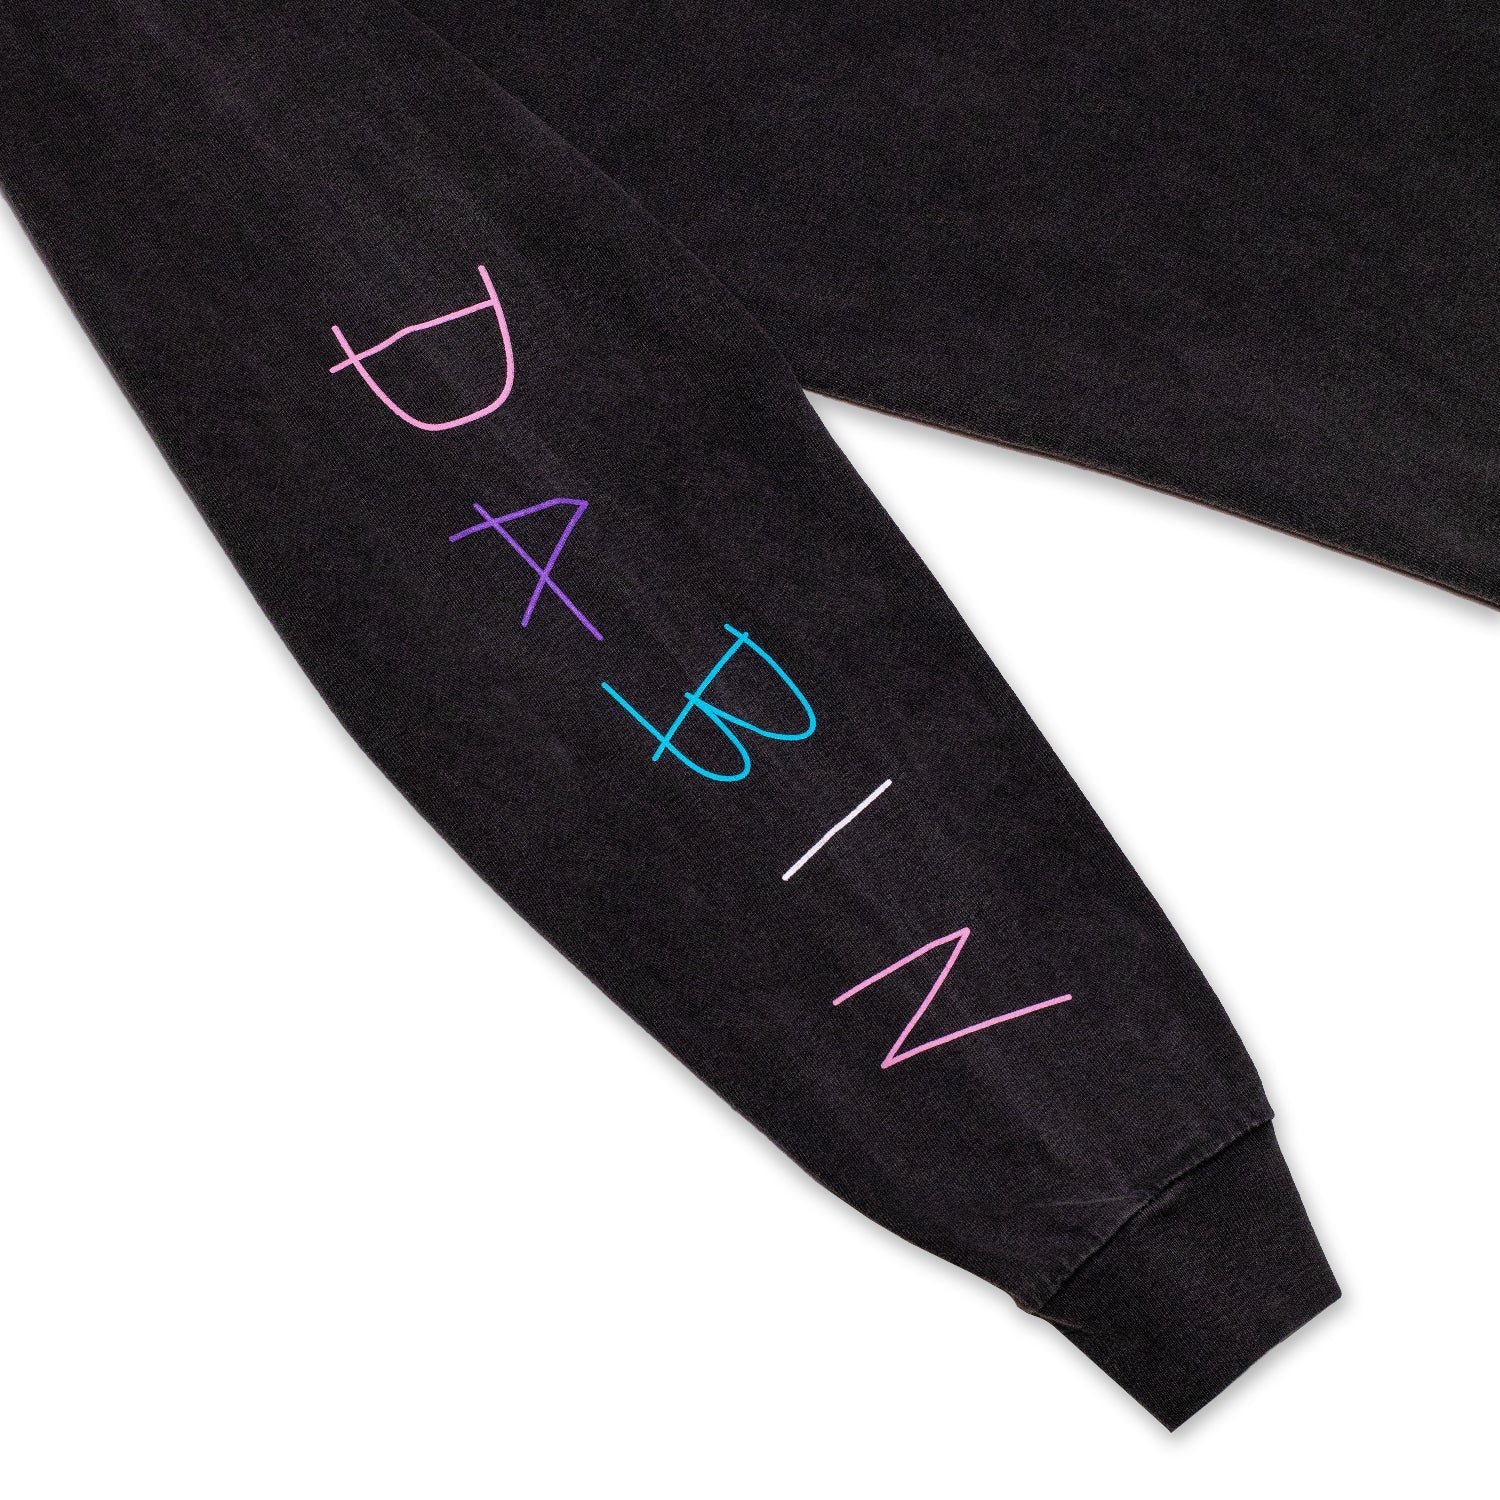 Dabin - Embroidered Charcoal Long Sleeve - Long Sleeve -  Dabin-  Electric Family Official Artist Merchandise